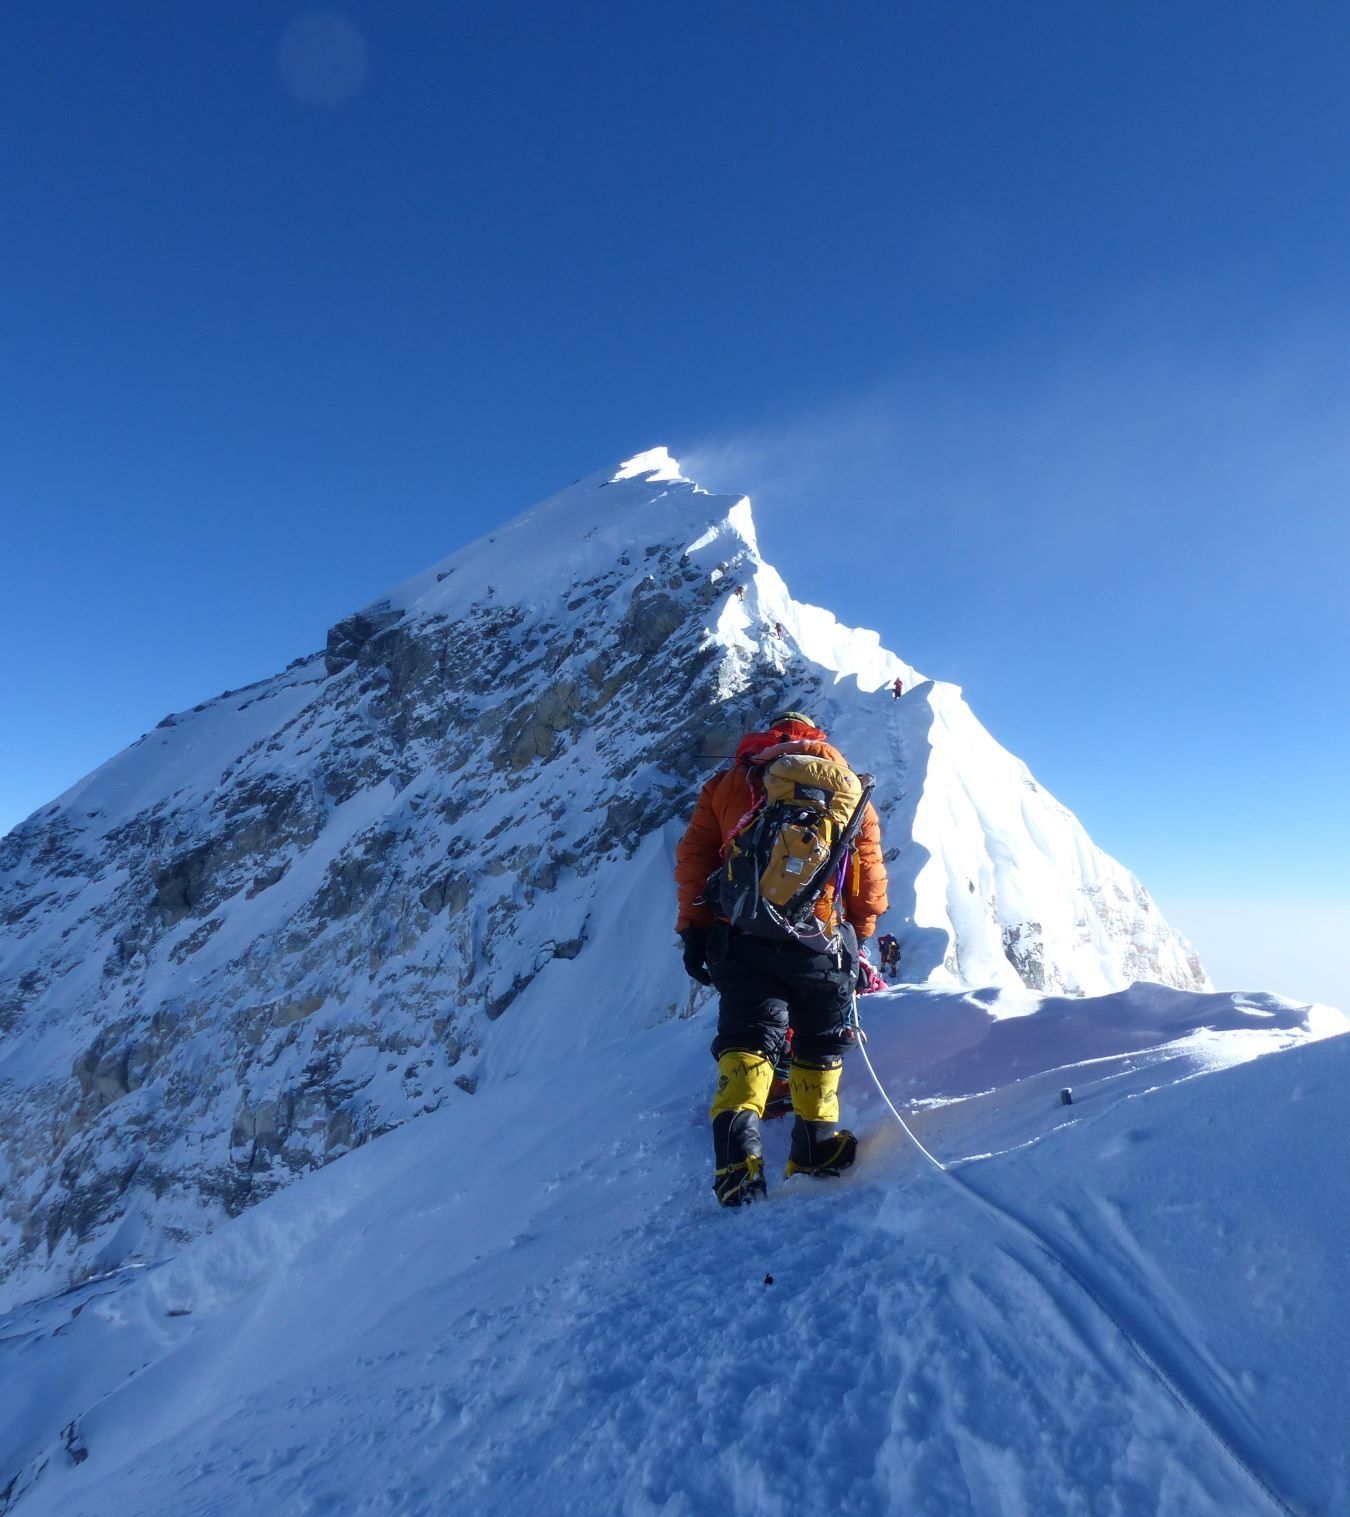 Climber approaching the Hillary step high on Mt Everest